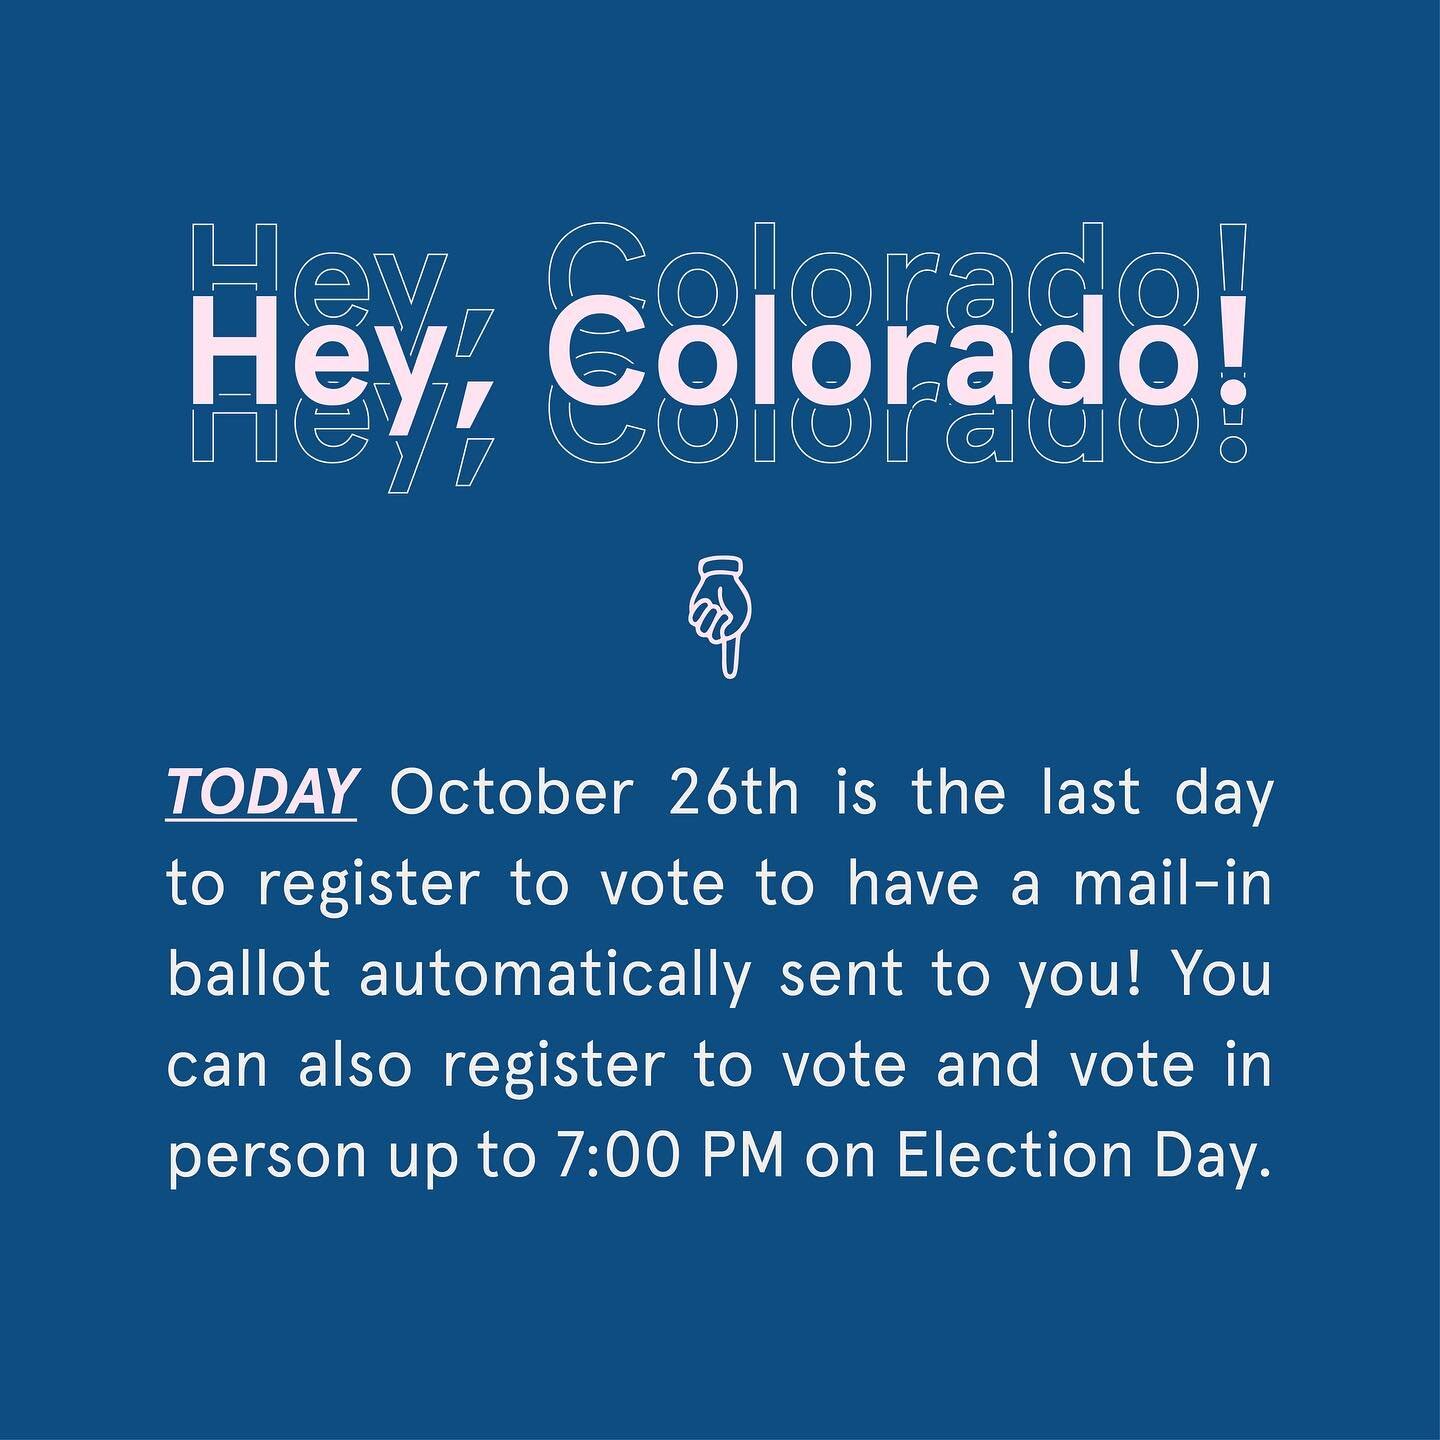 Colorado ❕Vote by mail is HUGE in your state 📬 TODAY is the last day to drop your ballot in the mail to guarantee it arrives by Election Day! Plus - if you register to vote by today you&rsquo;ll have a ballot mailed directly to you (just make sure y